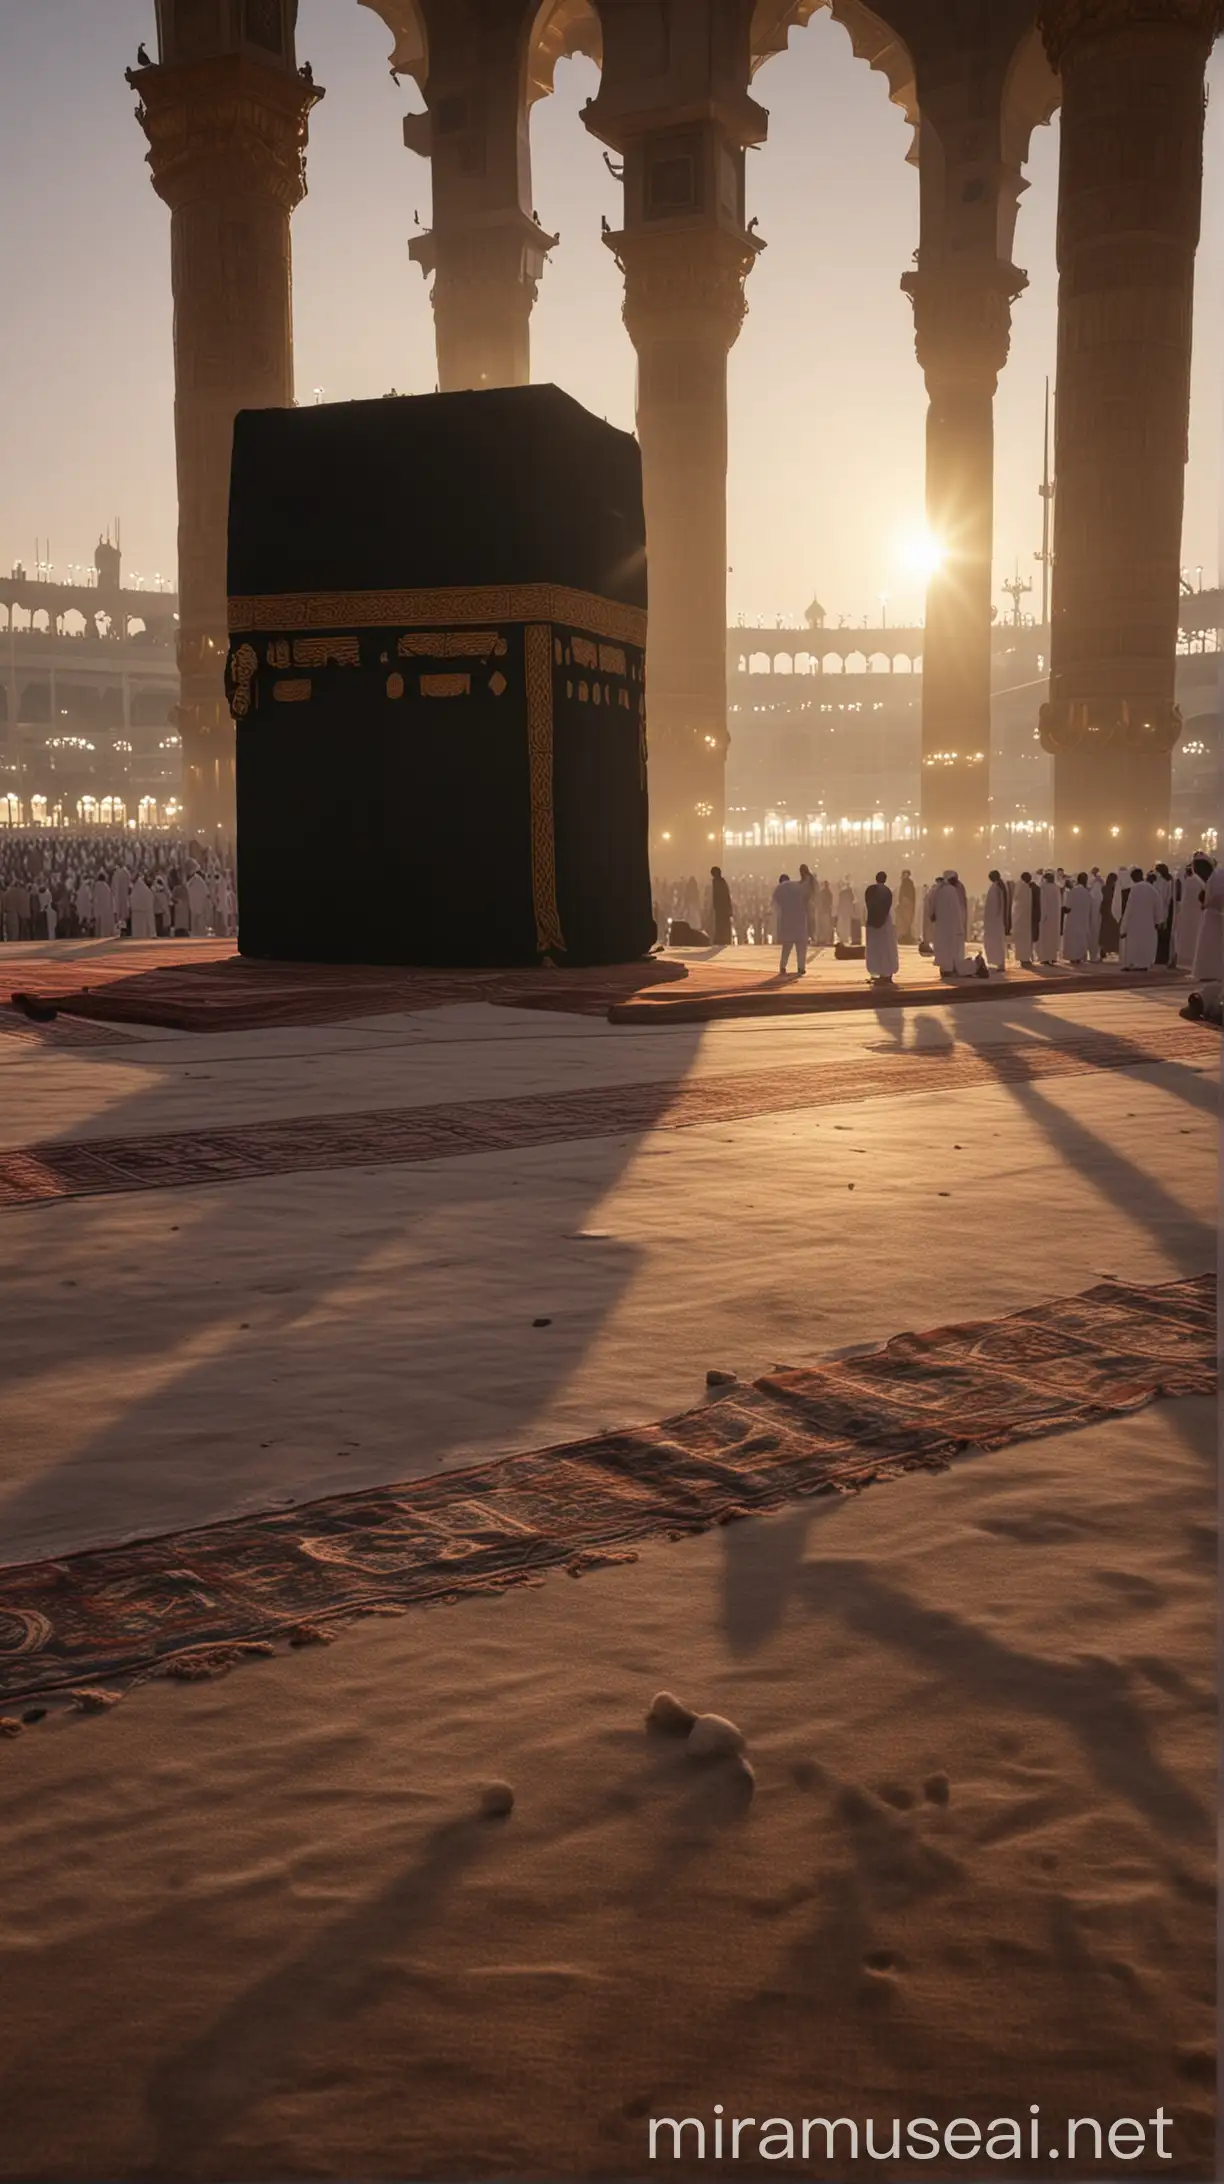 a man prayer to allah Salah: The silhouette of believers bowing in unison towards the Kaaba, their faces glowing in the soft light of dawn, as their prayers soar heavenward. 
D and 4K